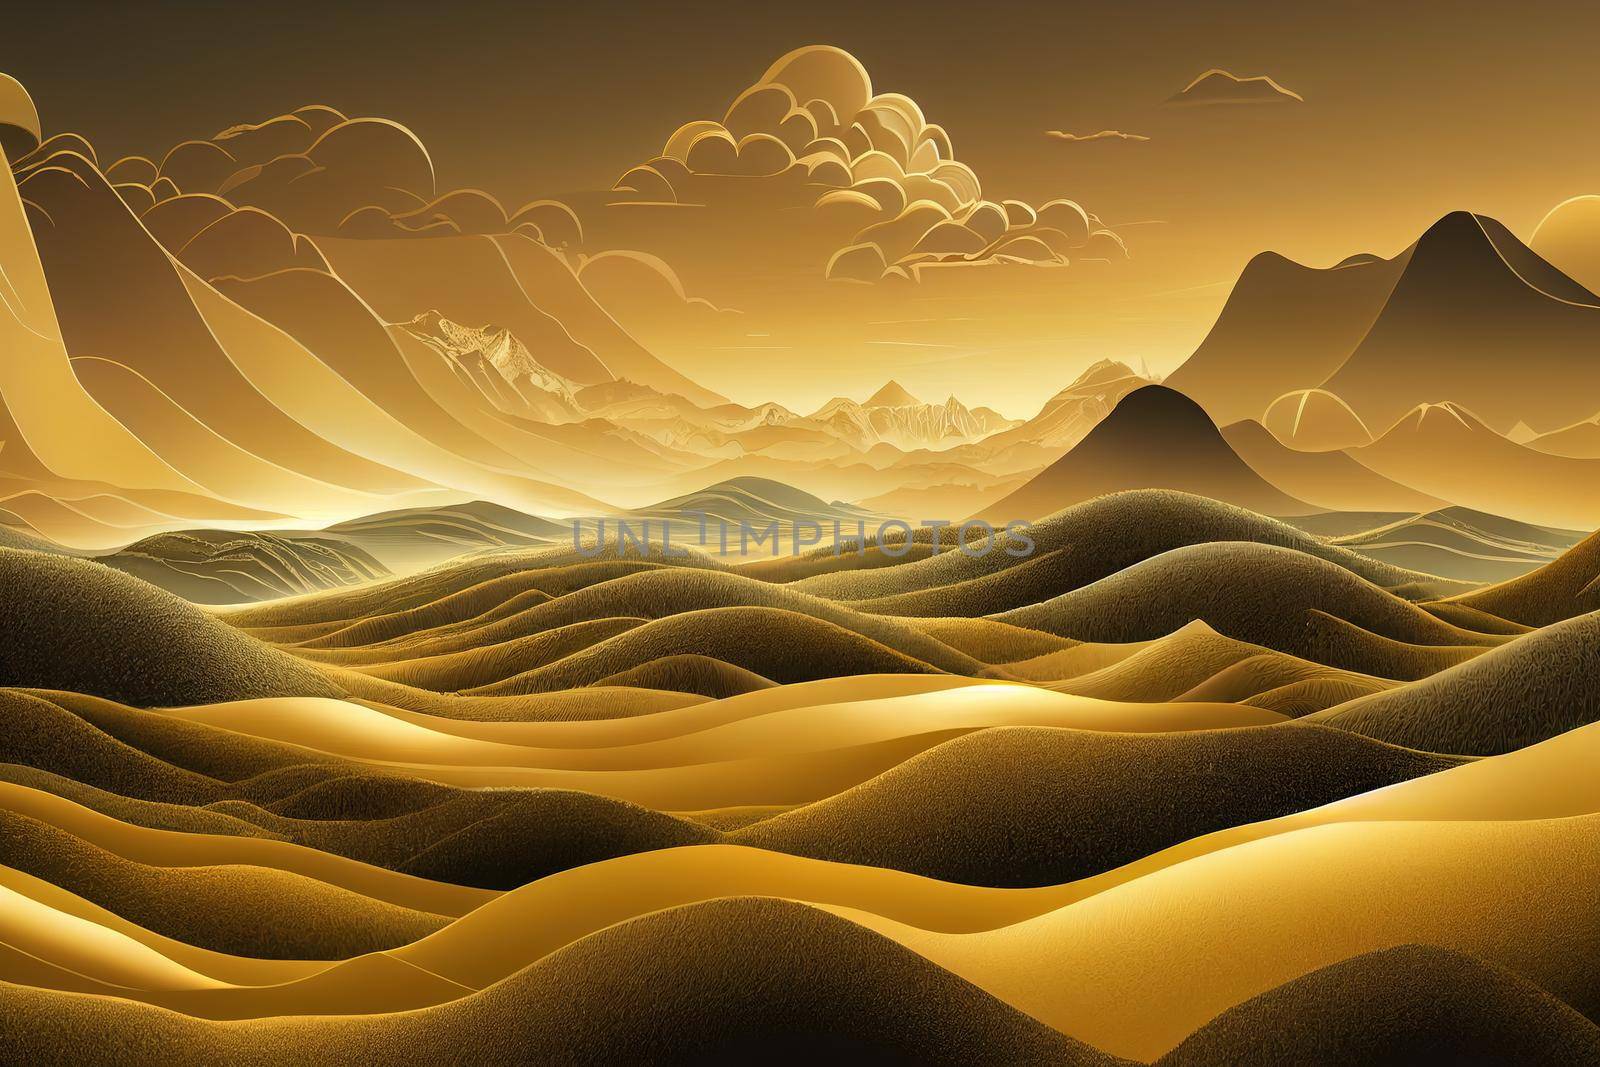 Luxury landscape art background with golden lines. with hills, mountains by 2ragon